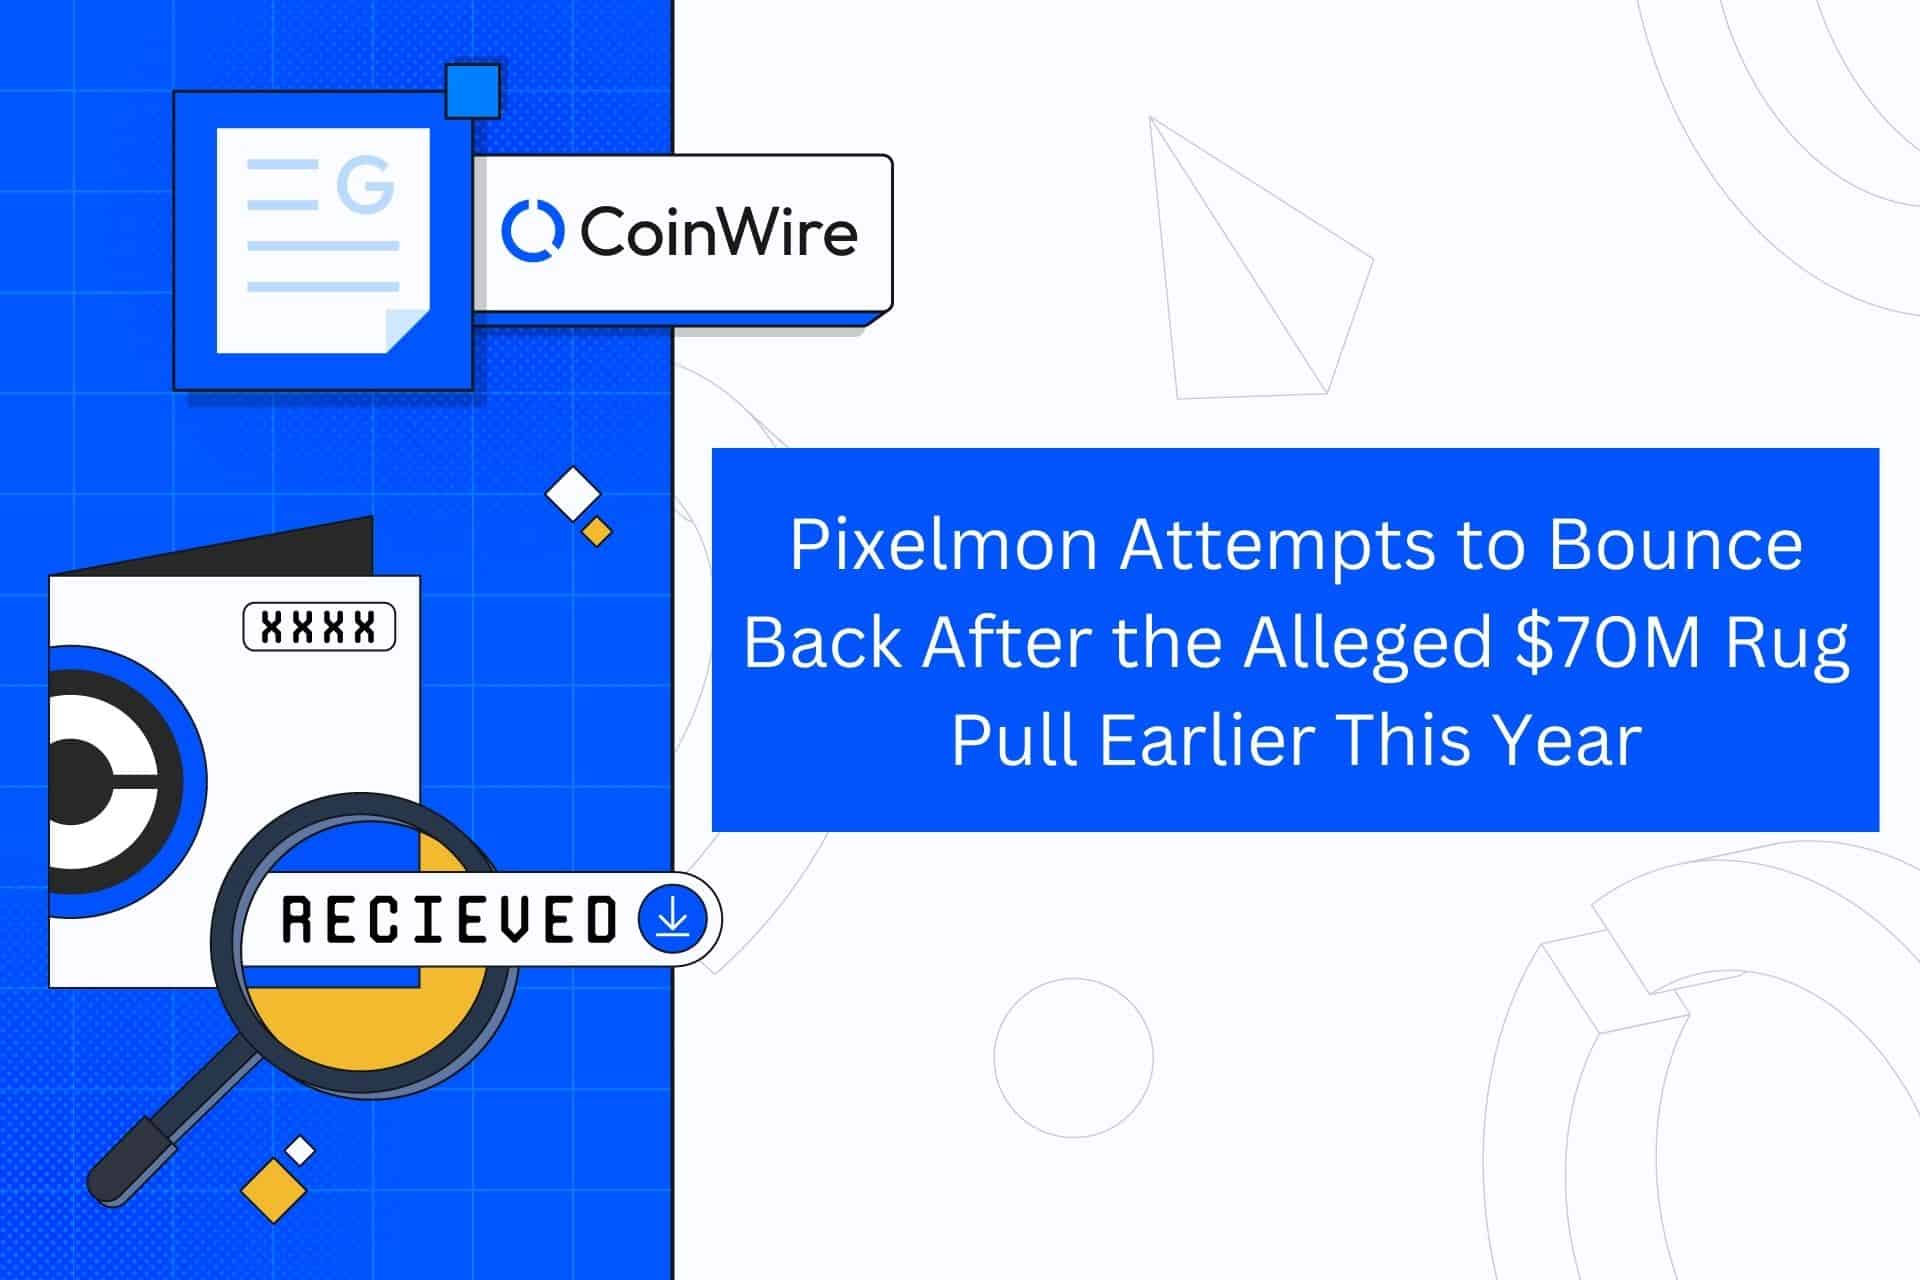 Pixelmon Attempts To Bounce Back After The Alleged $70M Rug Pull Earlier This Year